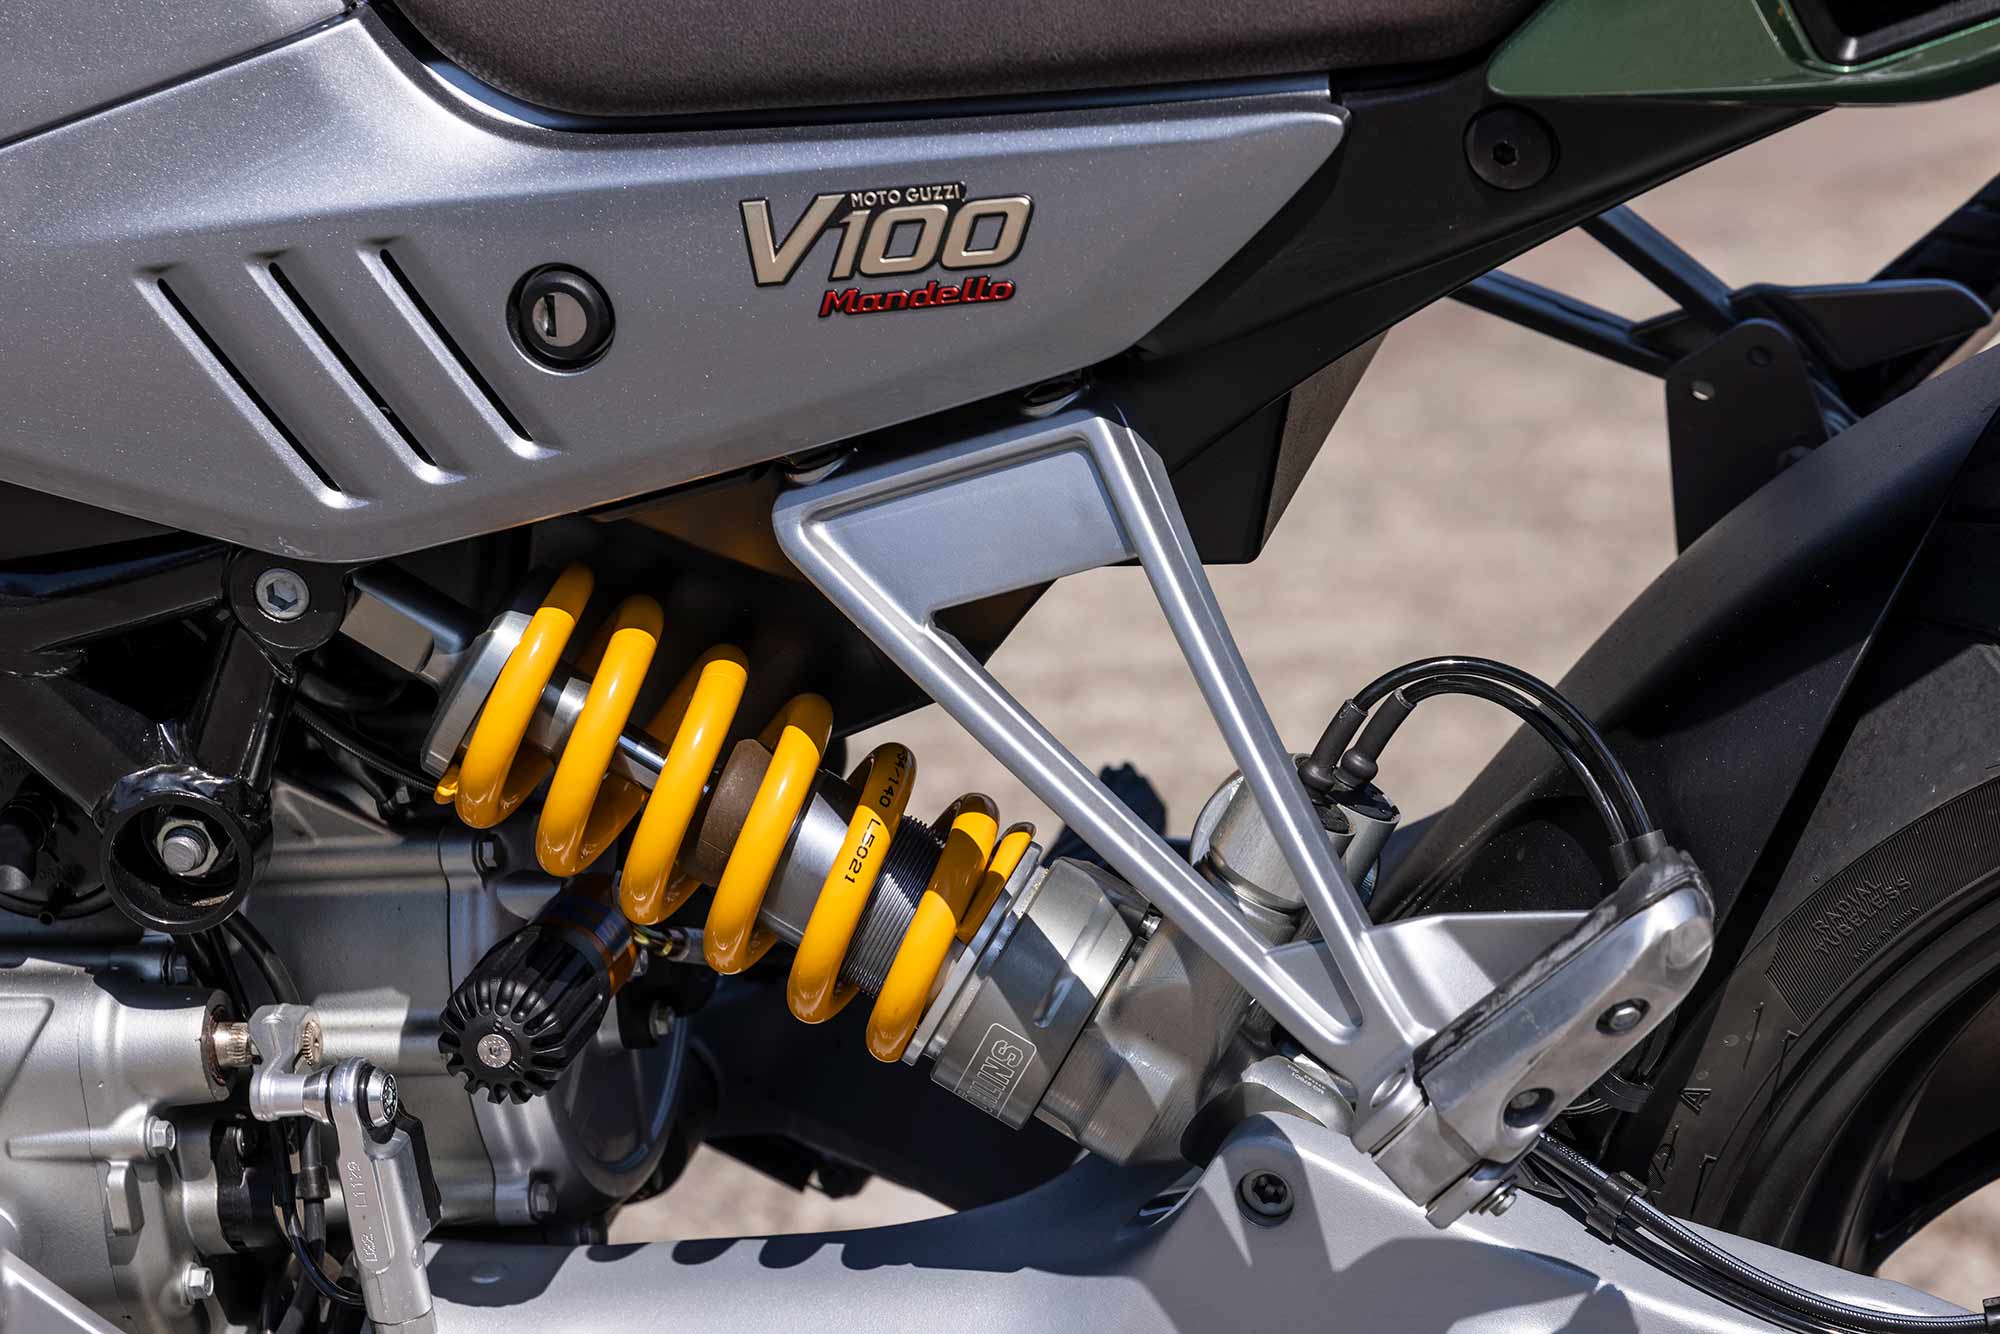 Guzzi's Suspension And Handling Features